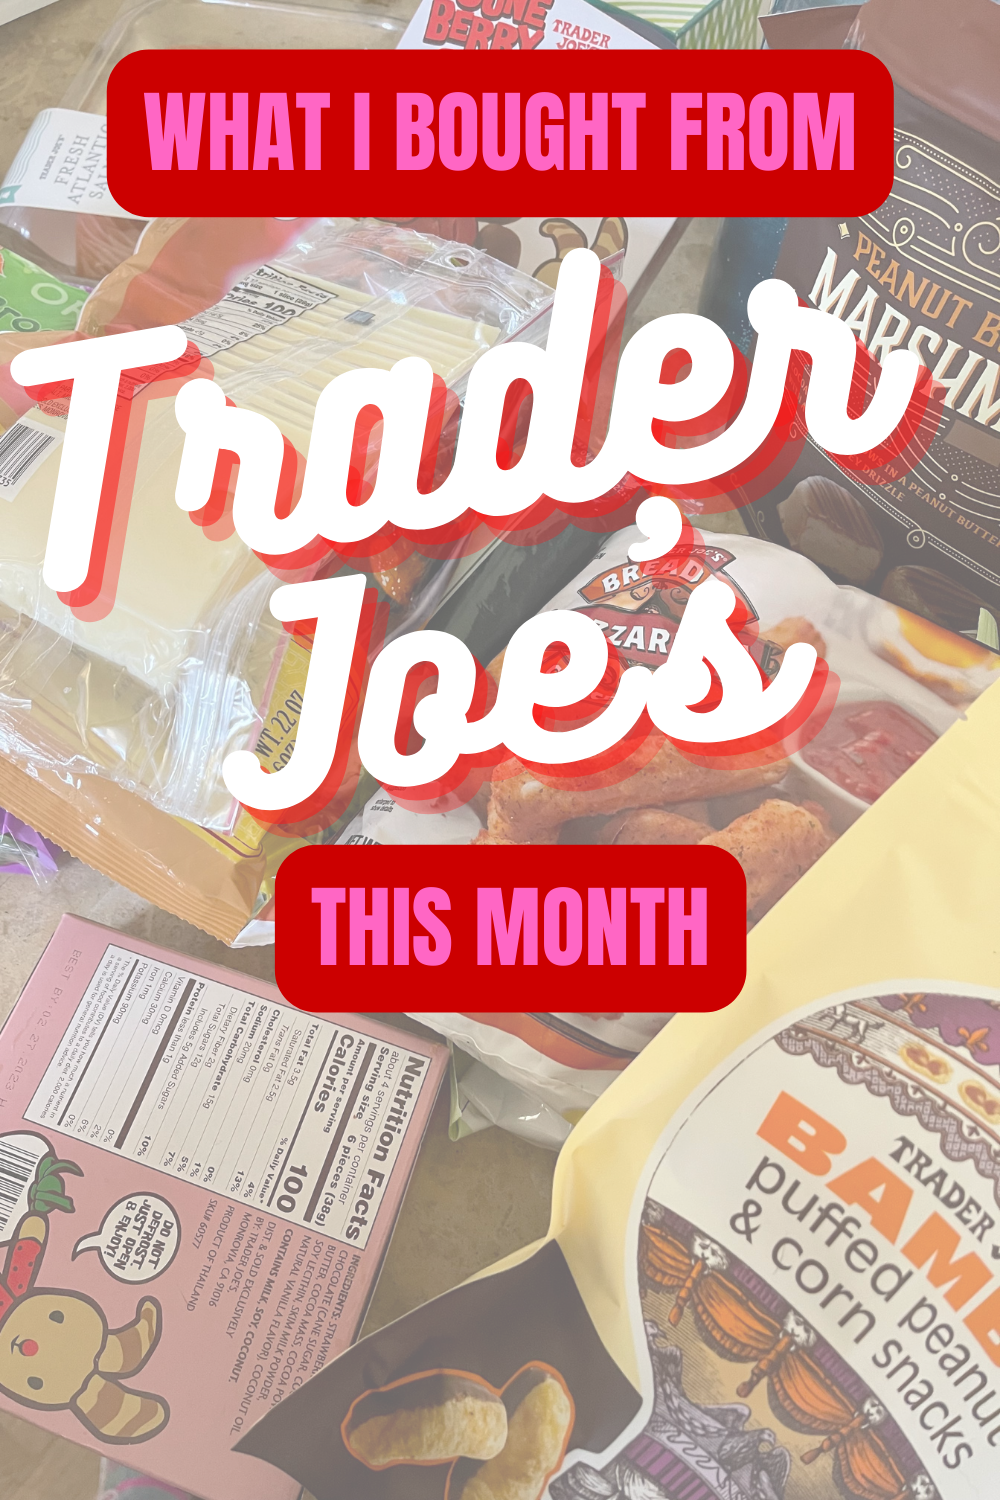 Looking for the best Trader Joe's products? Today I'm sharing all the items I bought and loved this month from Trader Joe's!